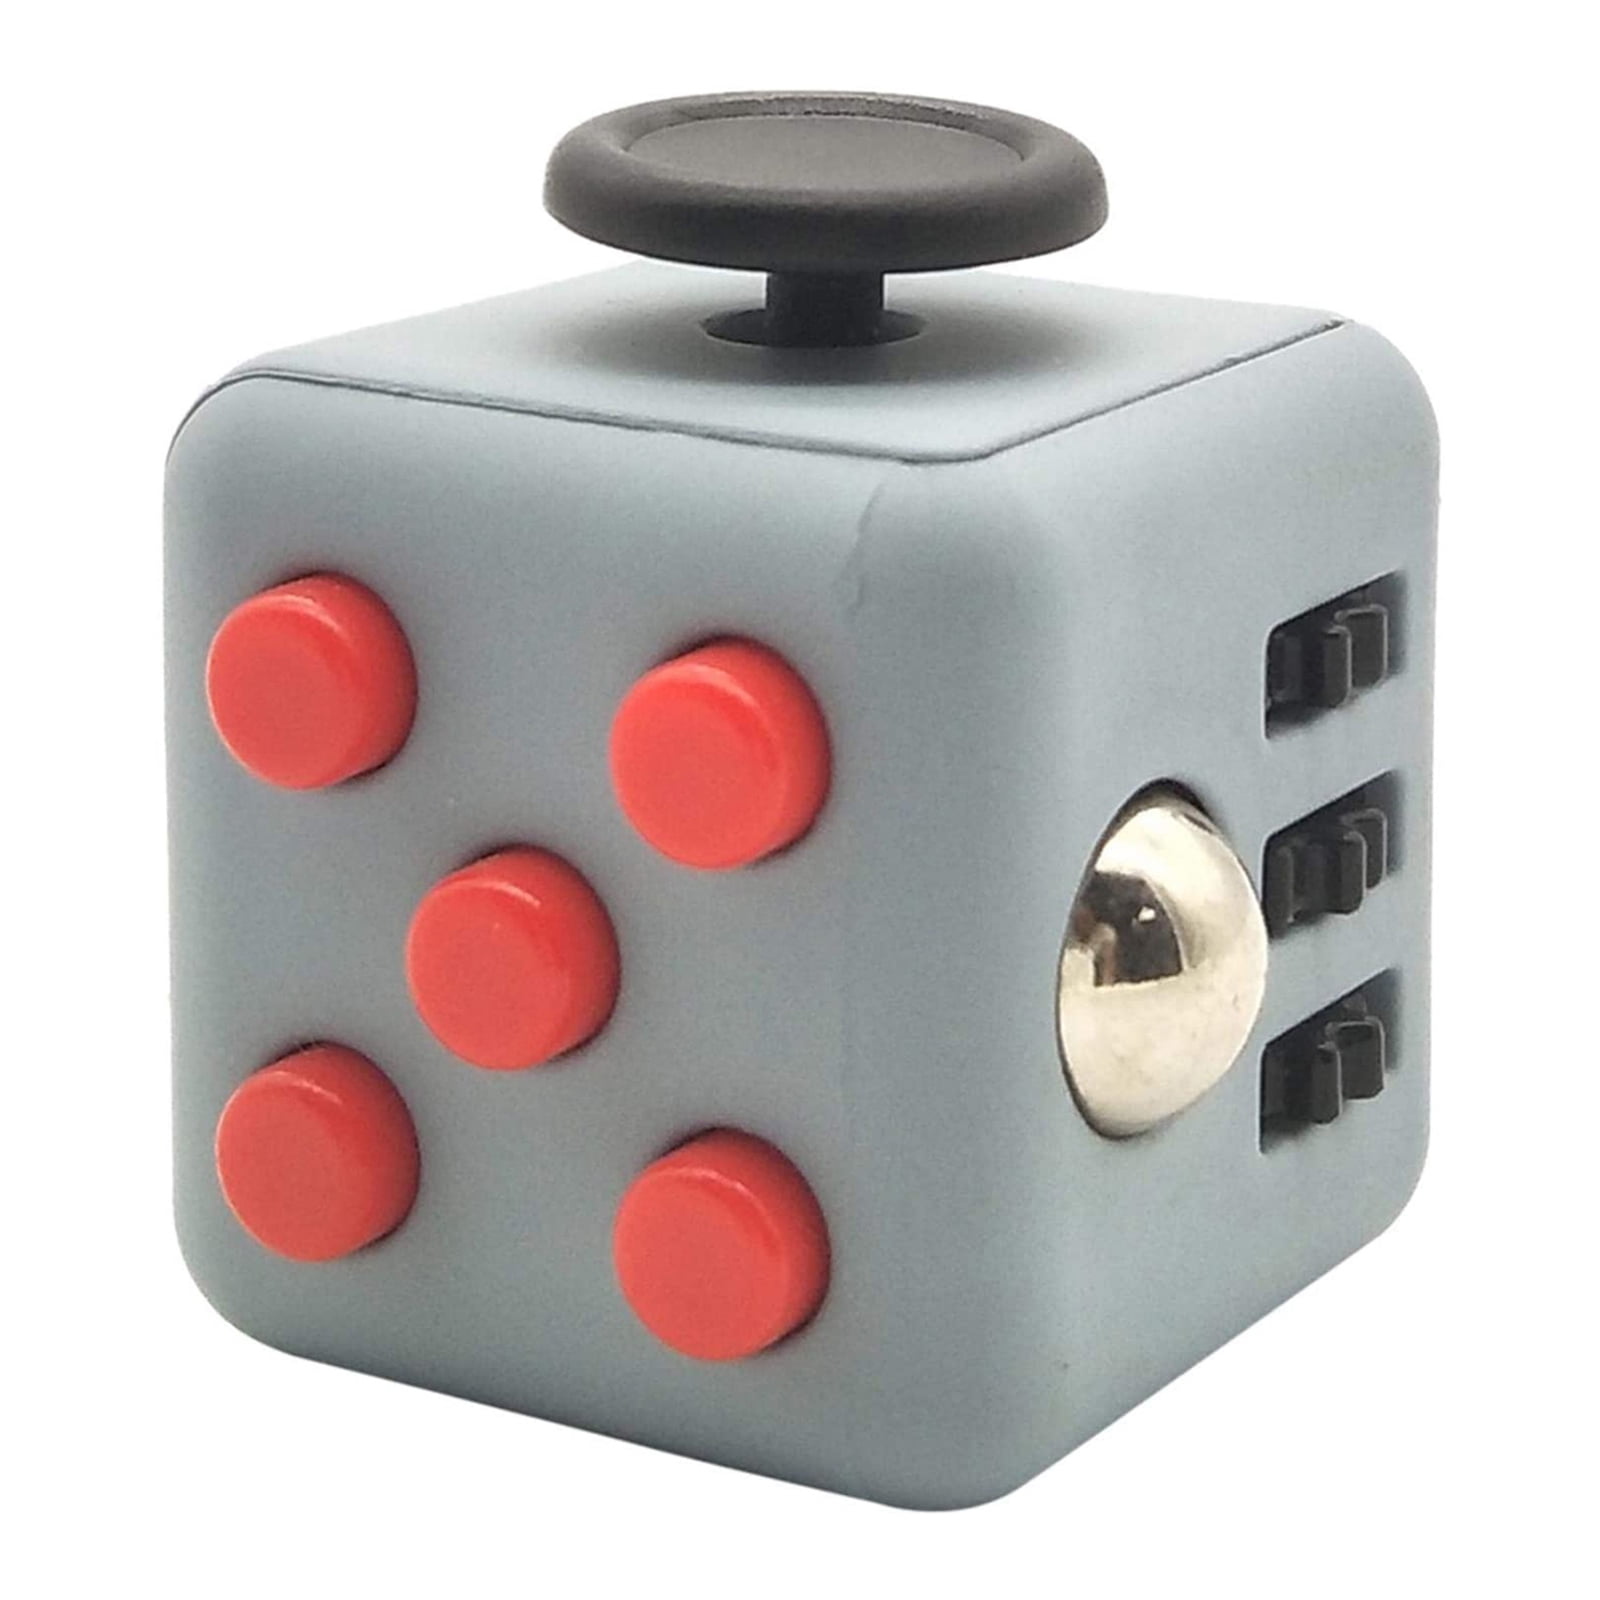 Small Fidget Cube Key Chain Toy Anxiety Relief Stocking Stuffers White on Black 